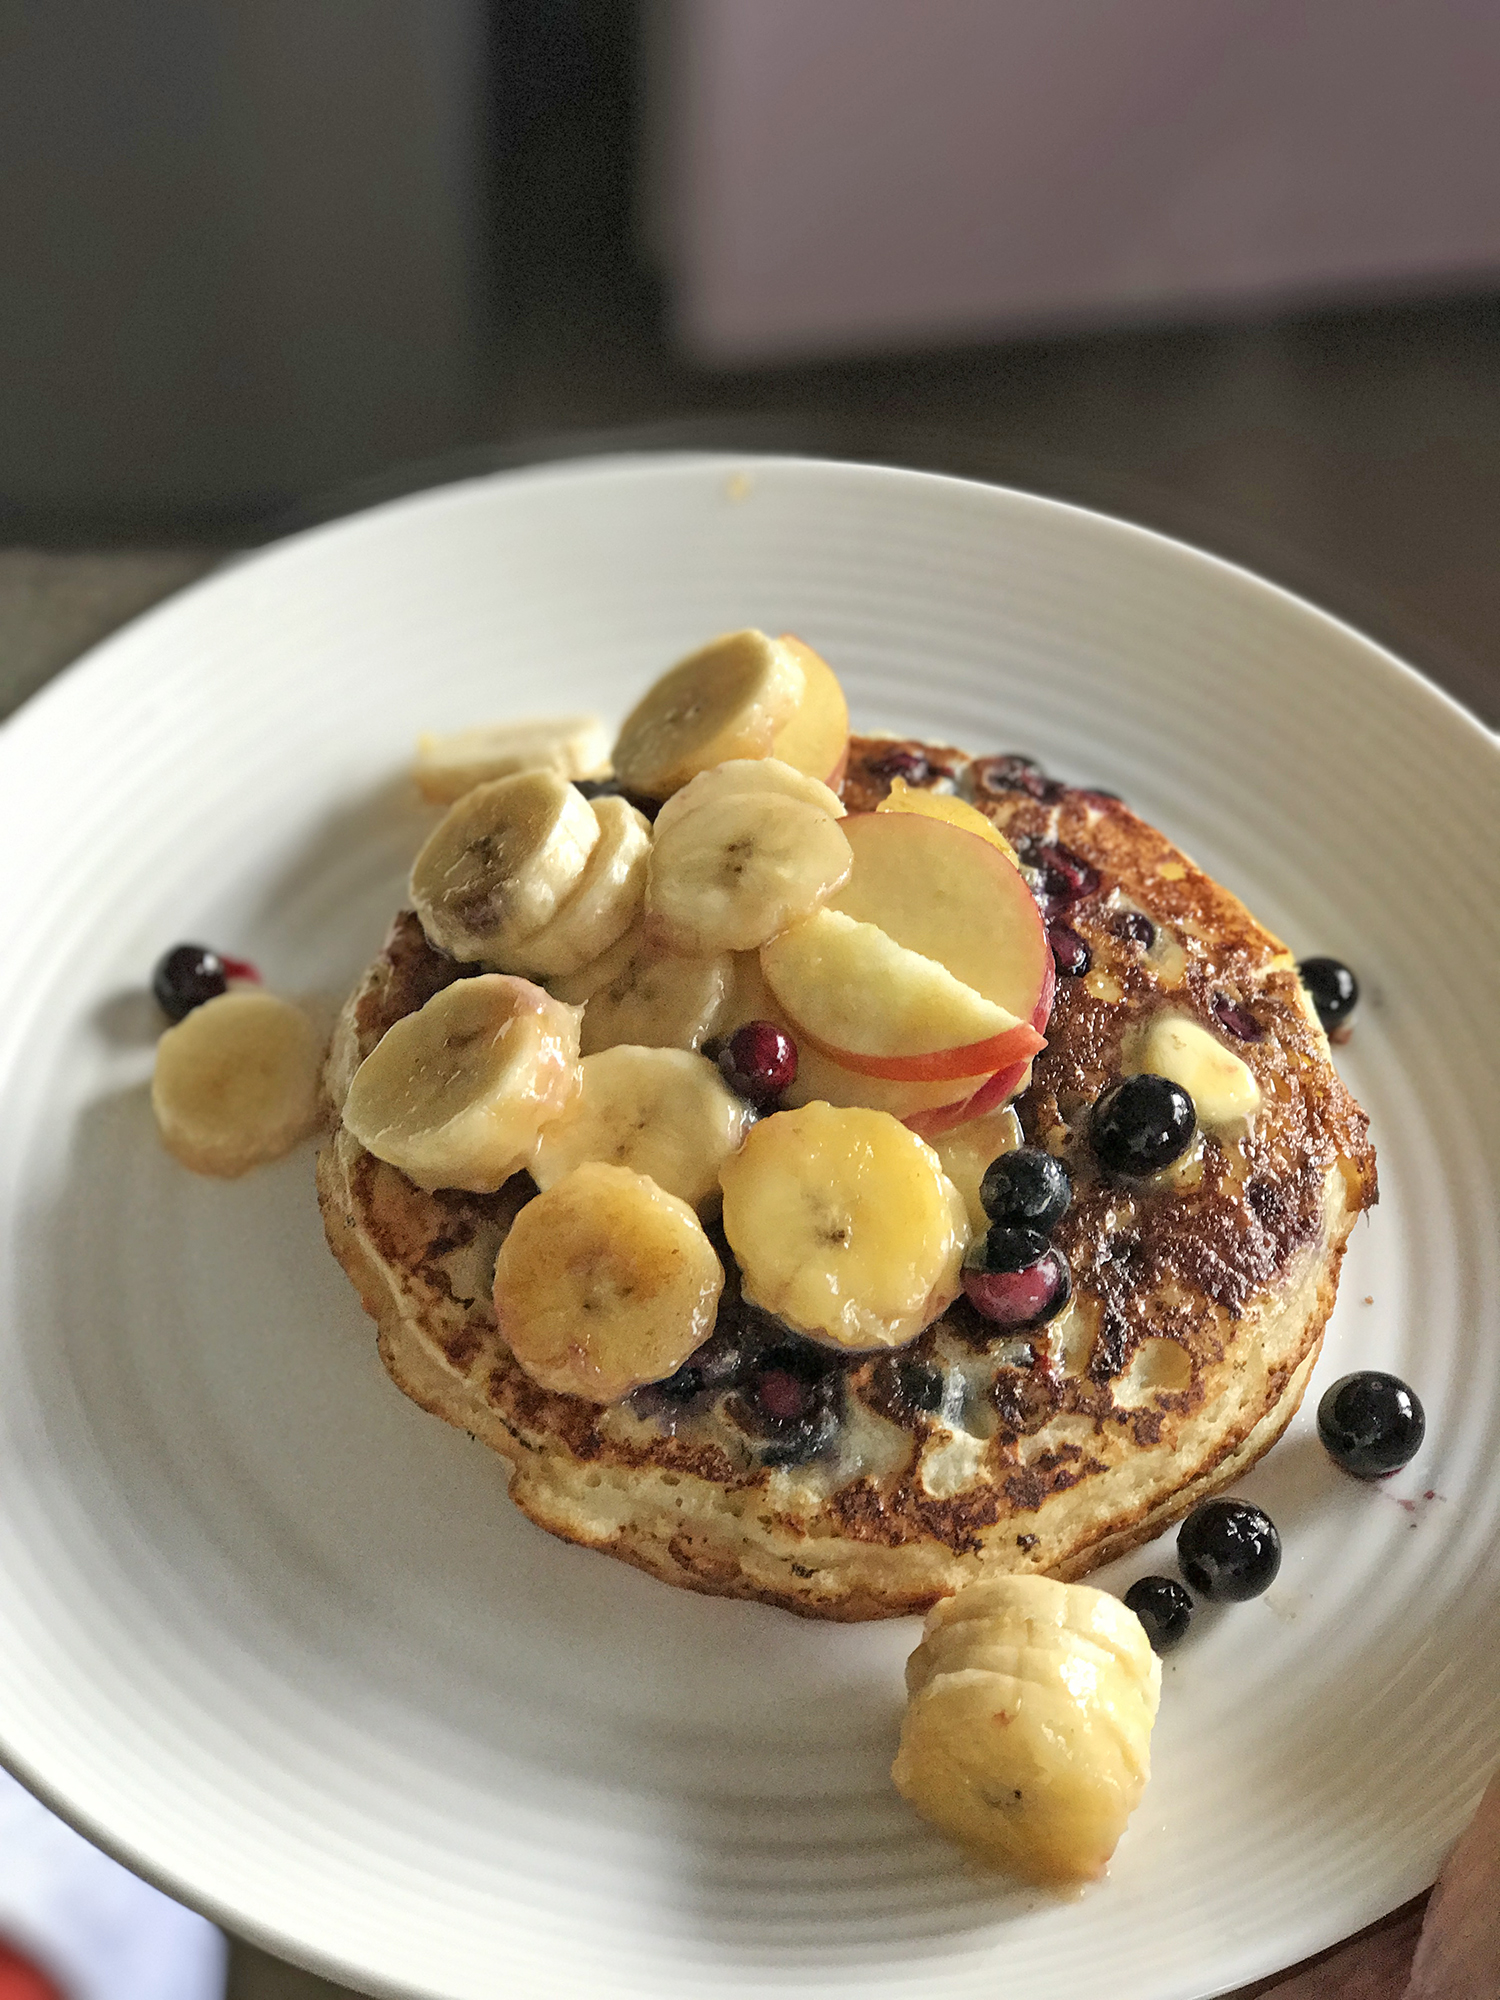   Pancake Mix  Whip it and fill it up with bananas, blueberries, flaked almonds. The fruits stop me from going over-board with the maple syrup though I should seriously stop having bacon on the side. Fast and easy breakfasts.. 